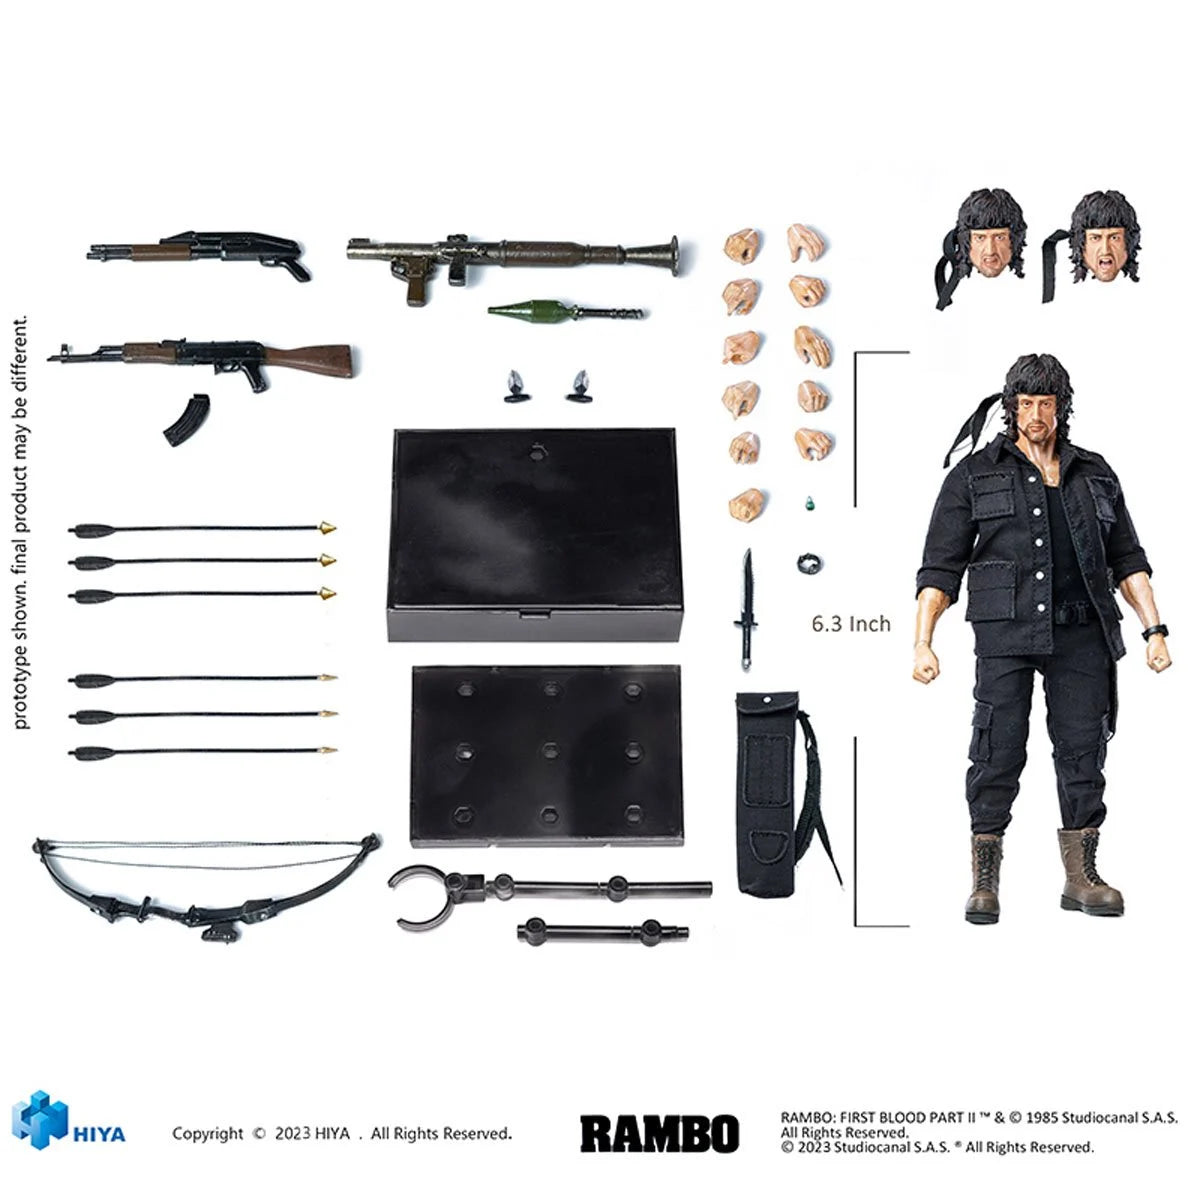 Rambo First Blood Part II 1:12 Scale Action Figure by Hiya Toys -Hiya Toys - India - www.superherotoystore.com